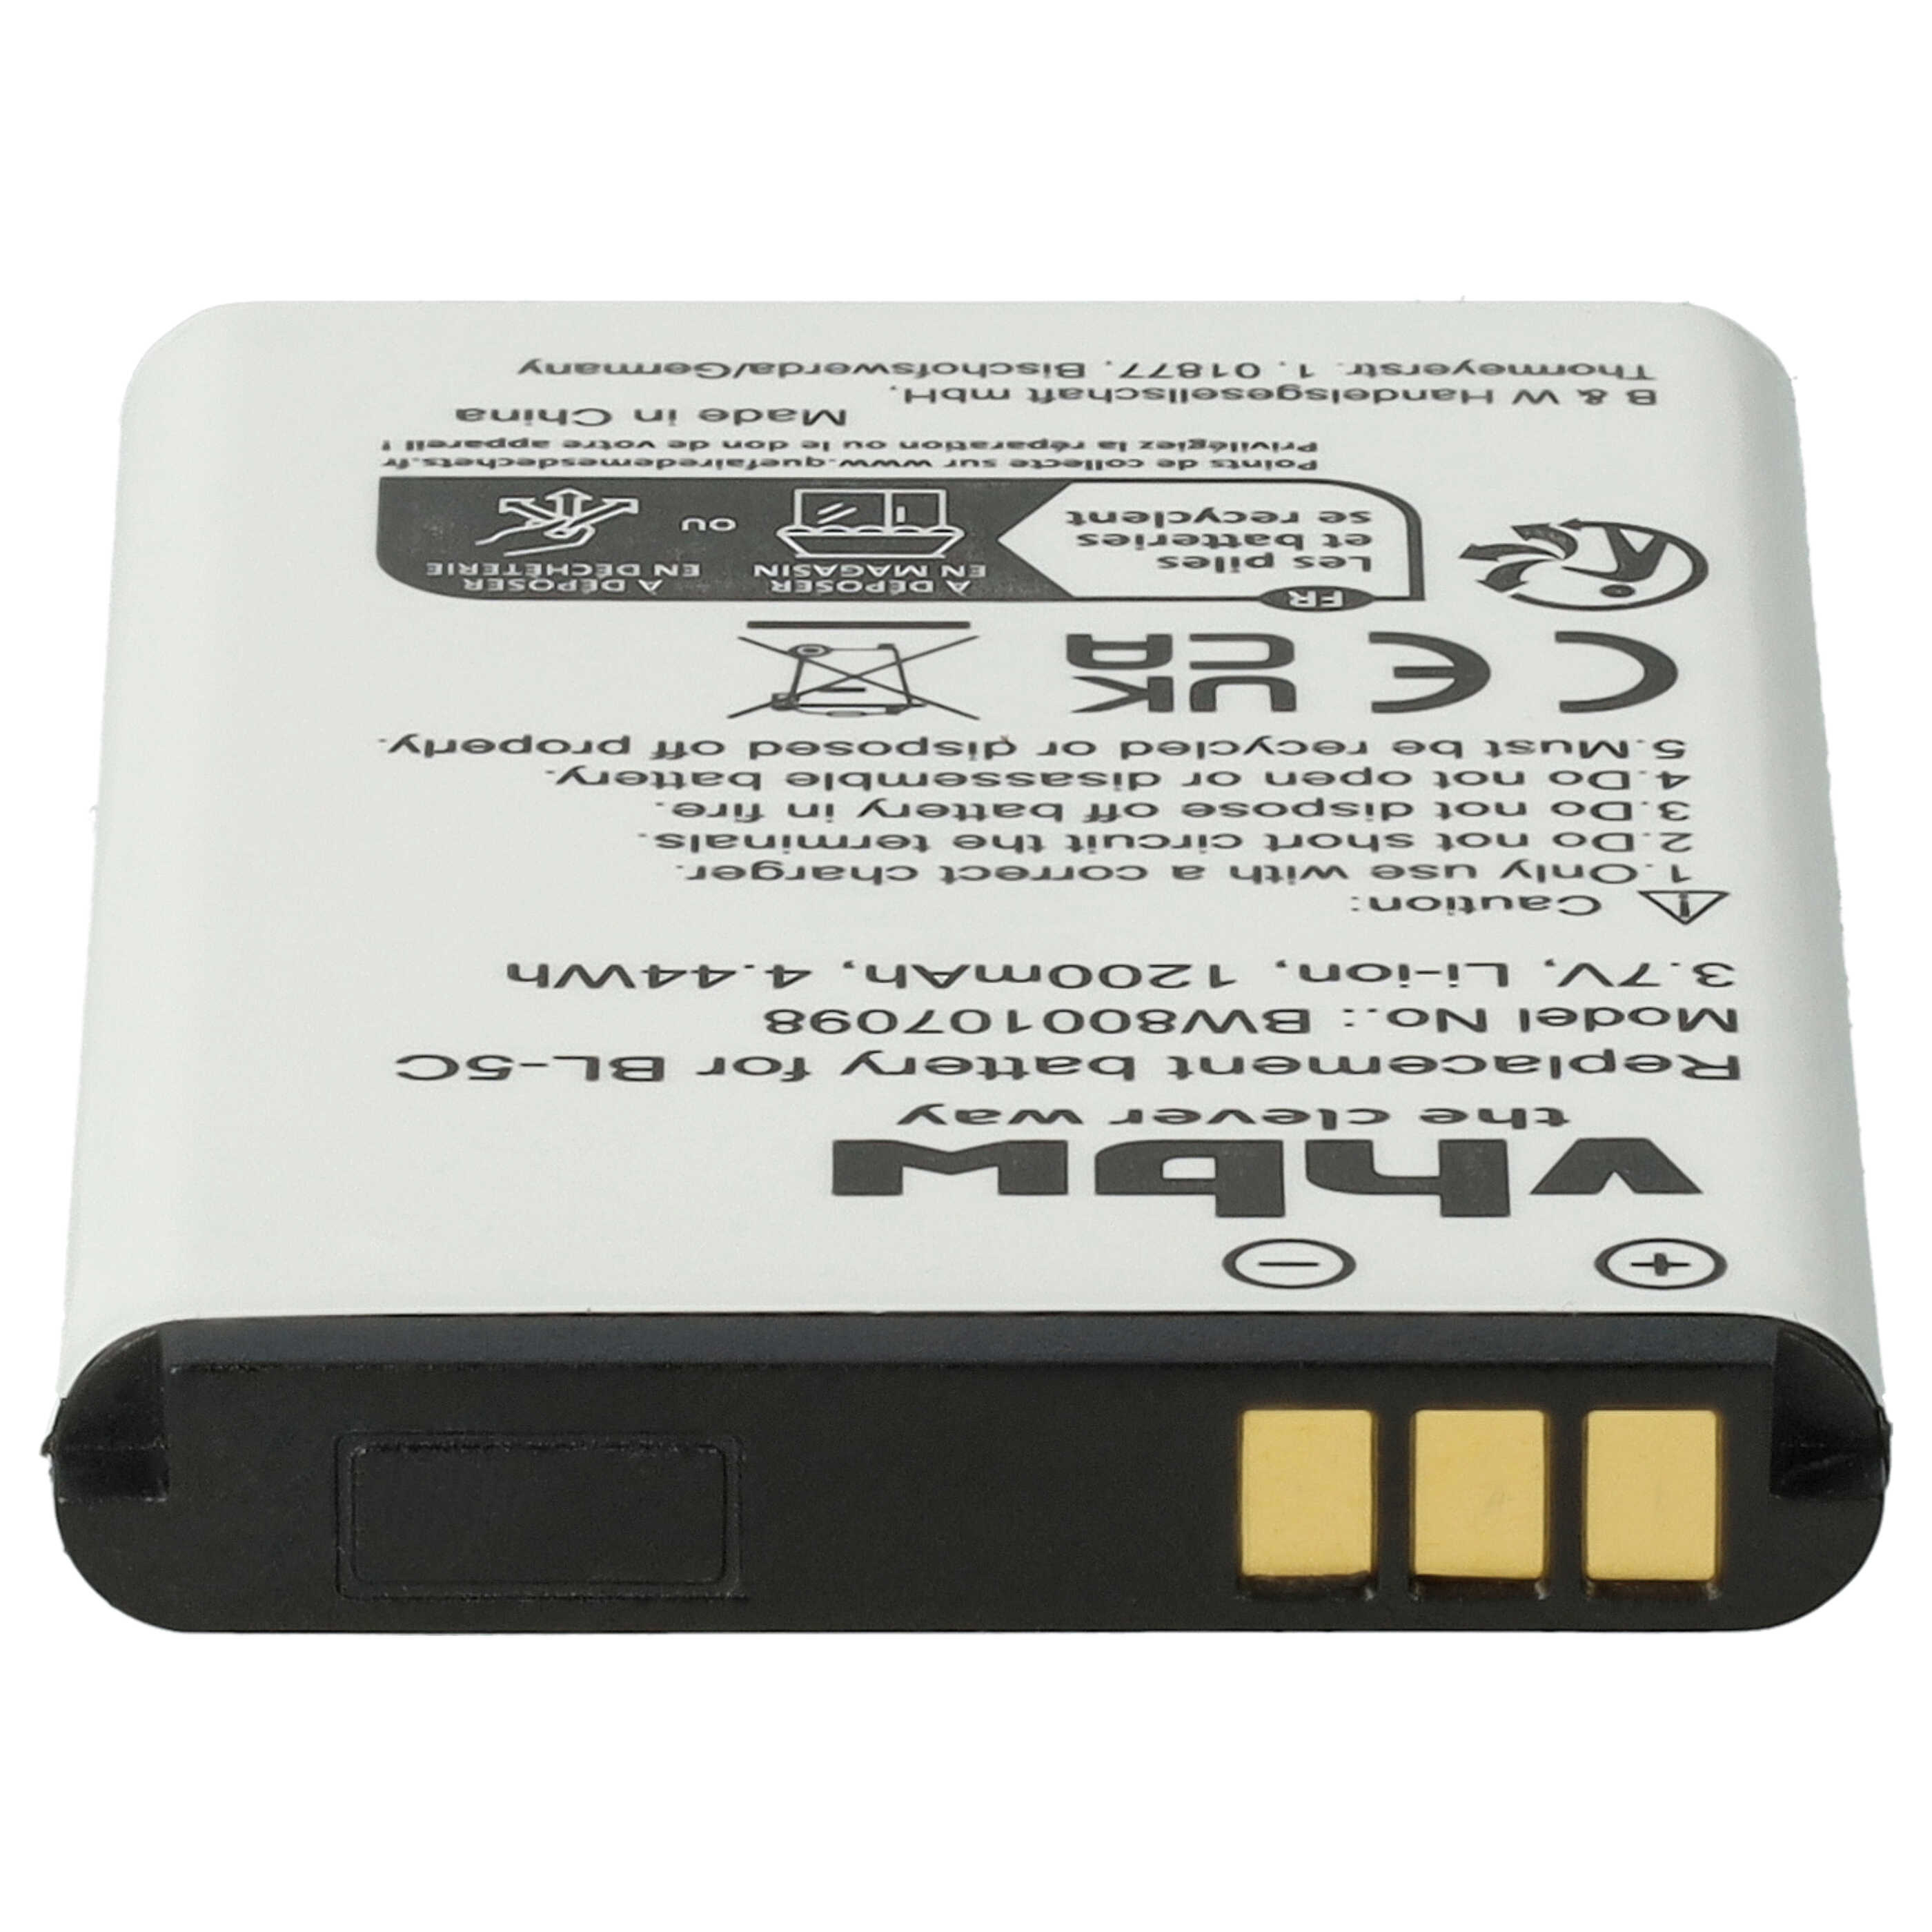 Mobile Phone Battery Replacement for MP-S-A1, RCB215, BS-16 - 1200mAh 3.7V Li-Ion